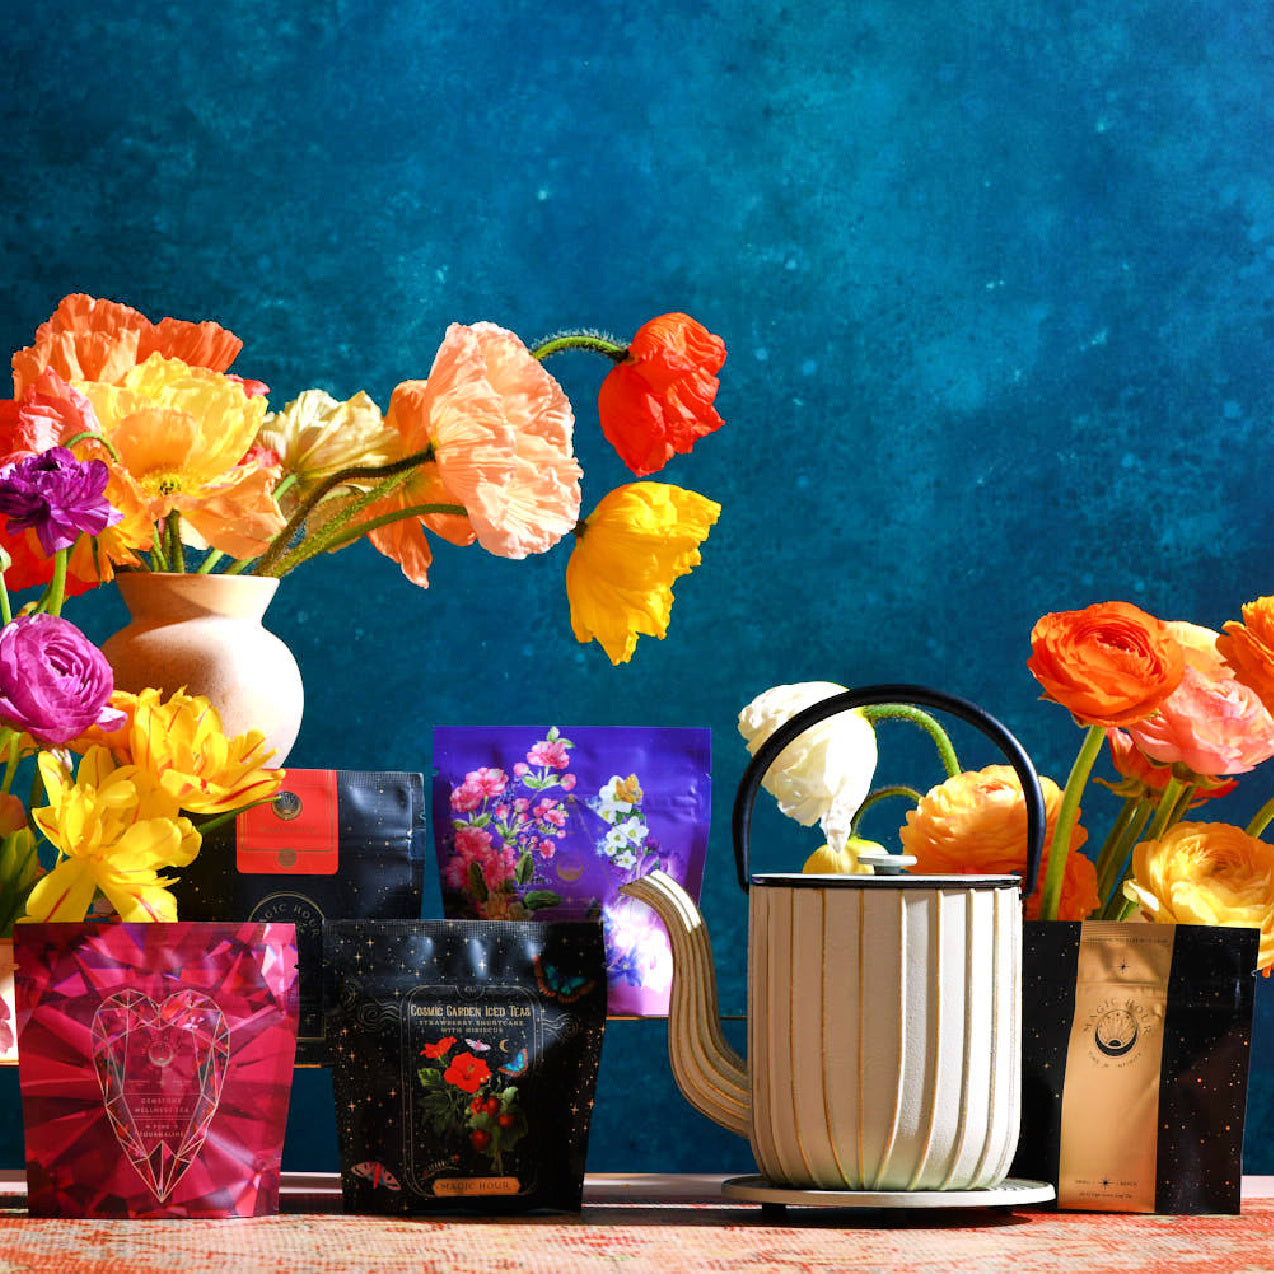 A brightly colored arrangement of flowers in vases is displayed against a vivid blue background. Various colorful packets, possibly seeds or the White Magic Sampler Box from Club Magic Hour, are positioned around a cream-colored, ribbed watering can. The scene exudes a lively and vibrant atmosphere.